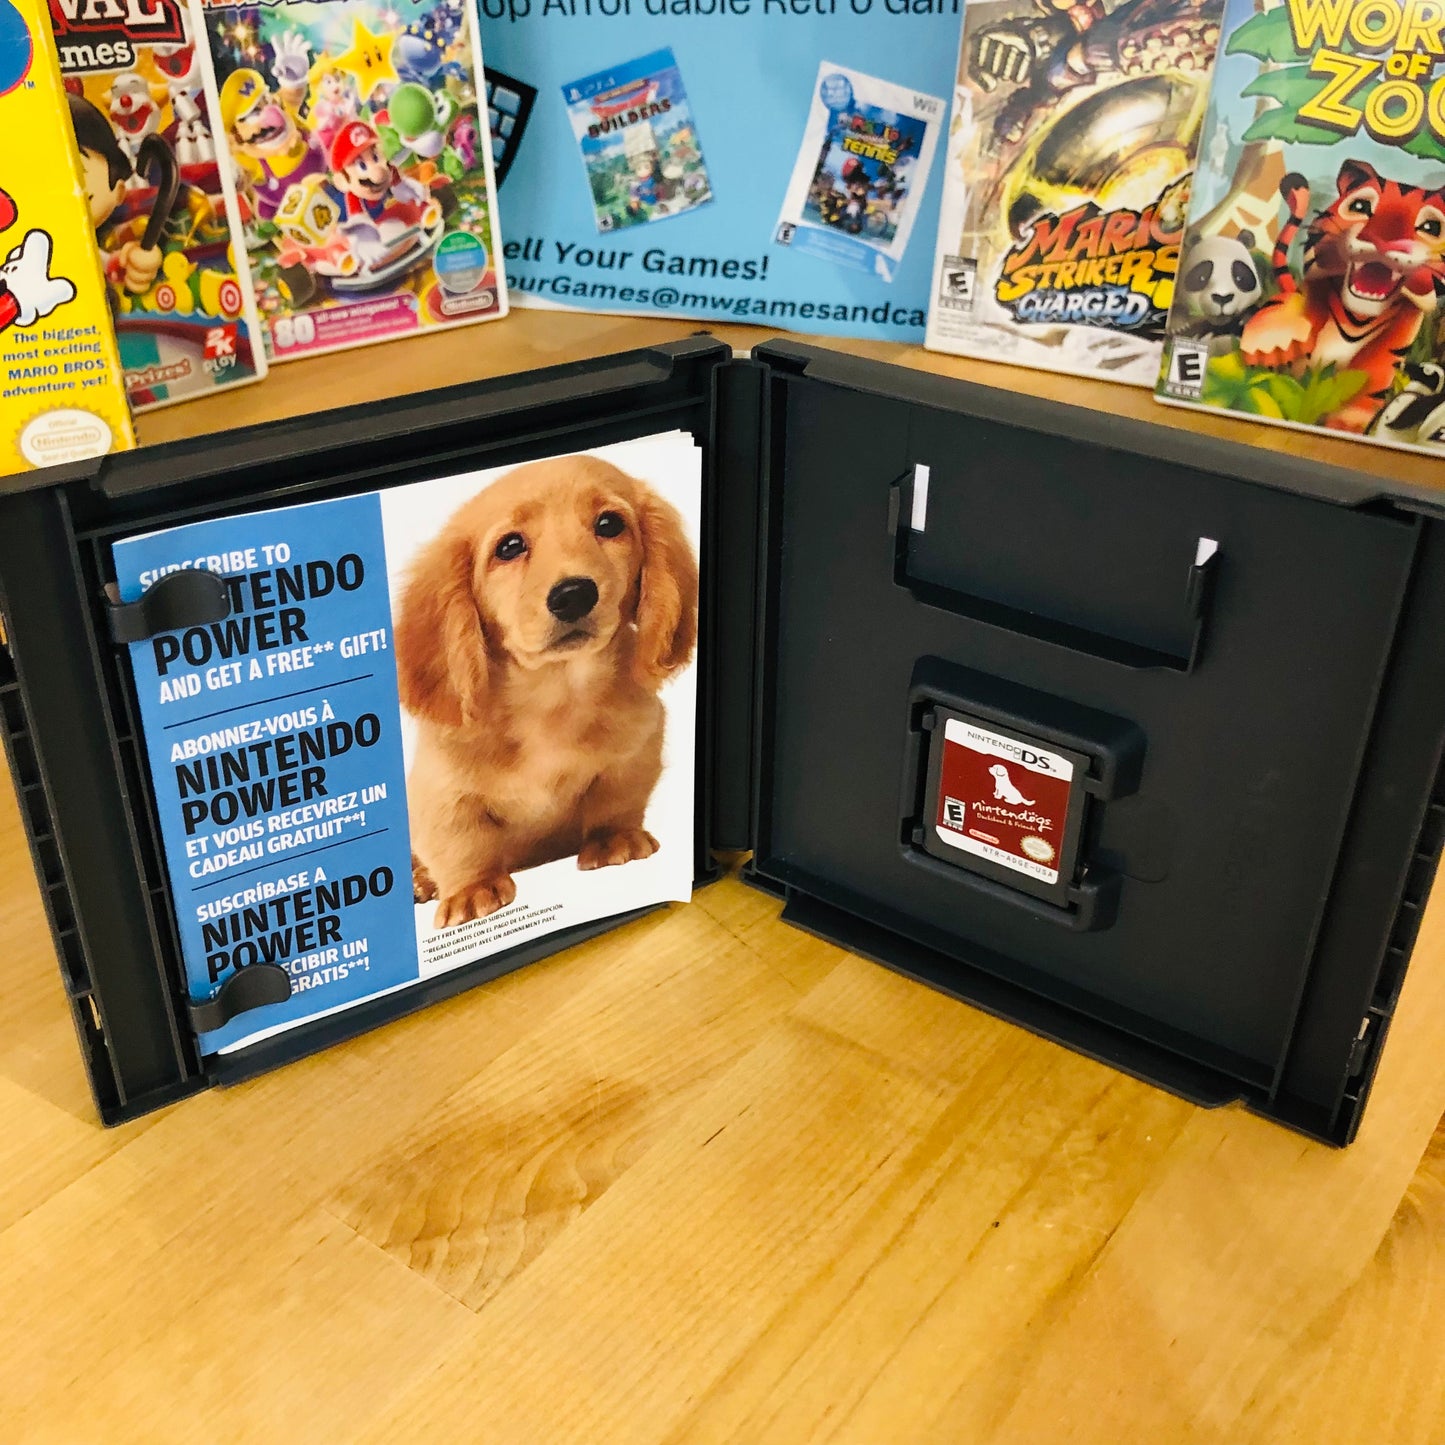 Nintendogs Dachshund And Friends - DS Game